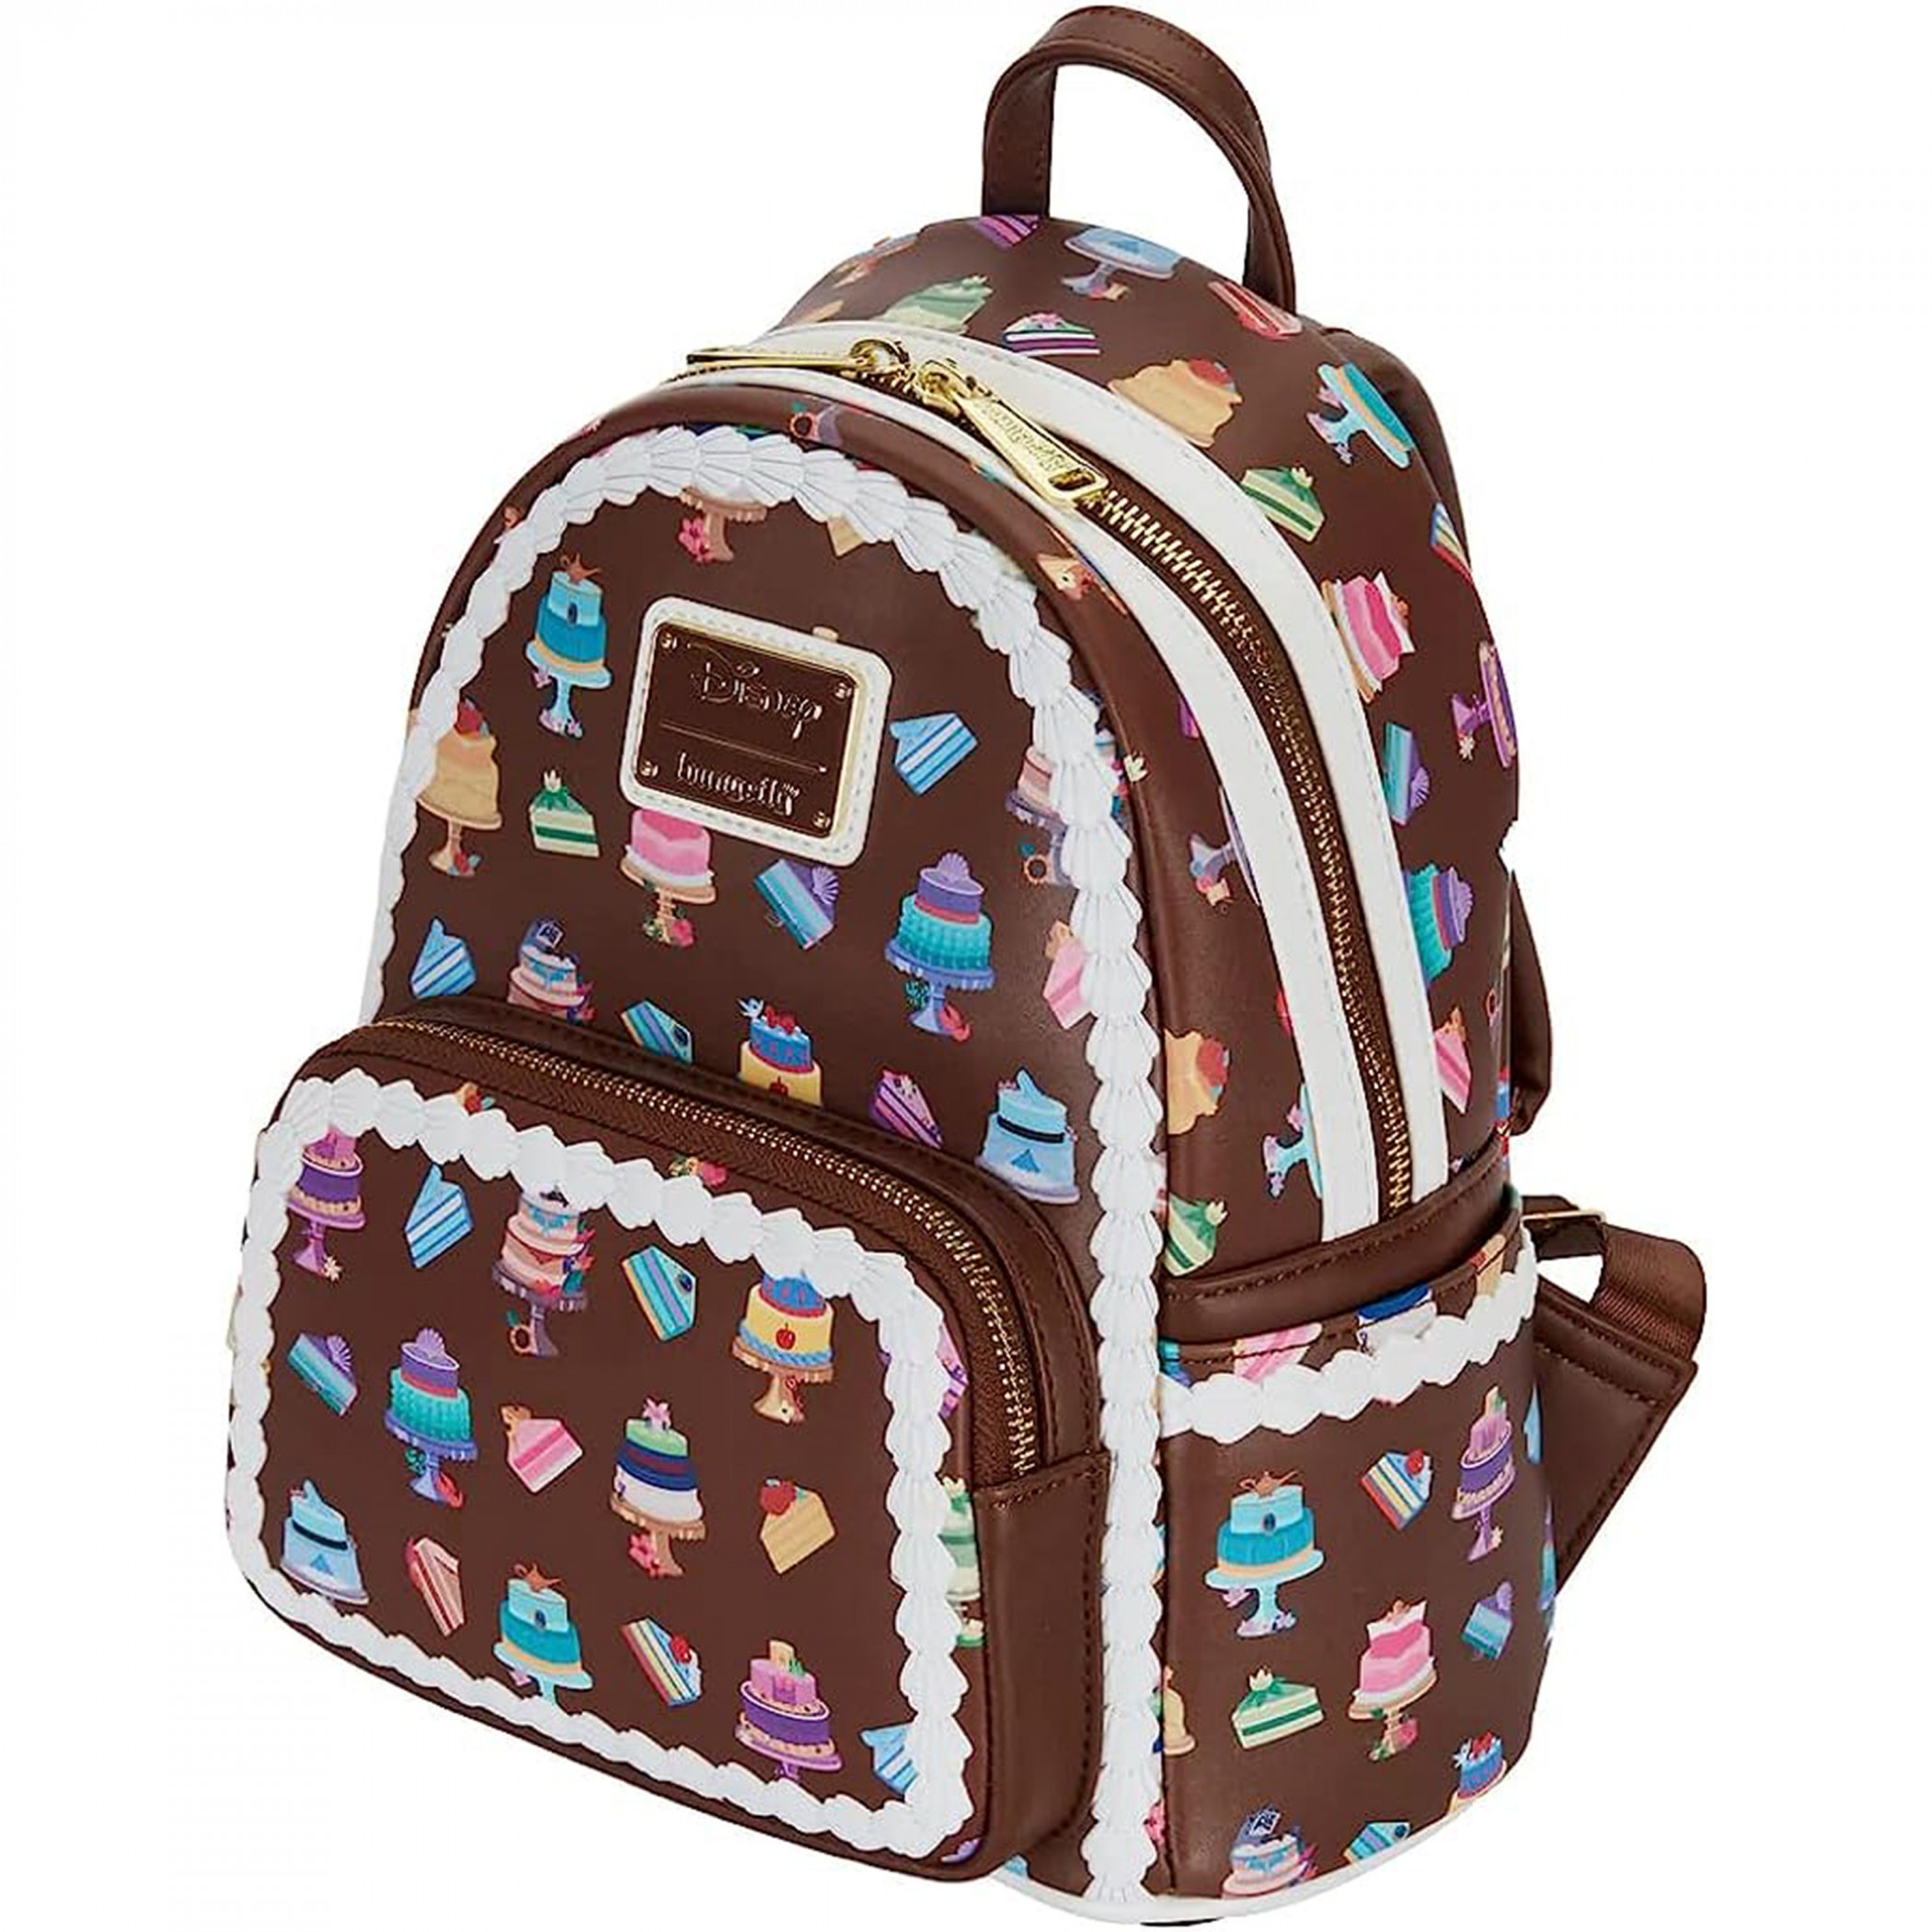 Disney Princess Themed Cakes Mini Backpack By Loungefly